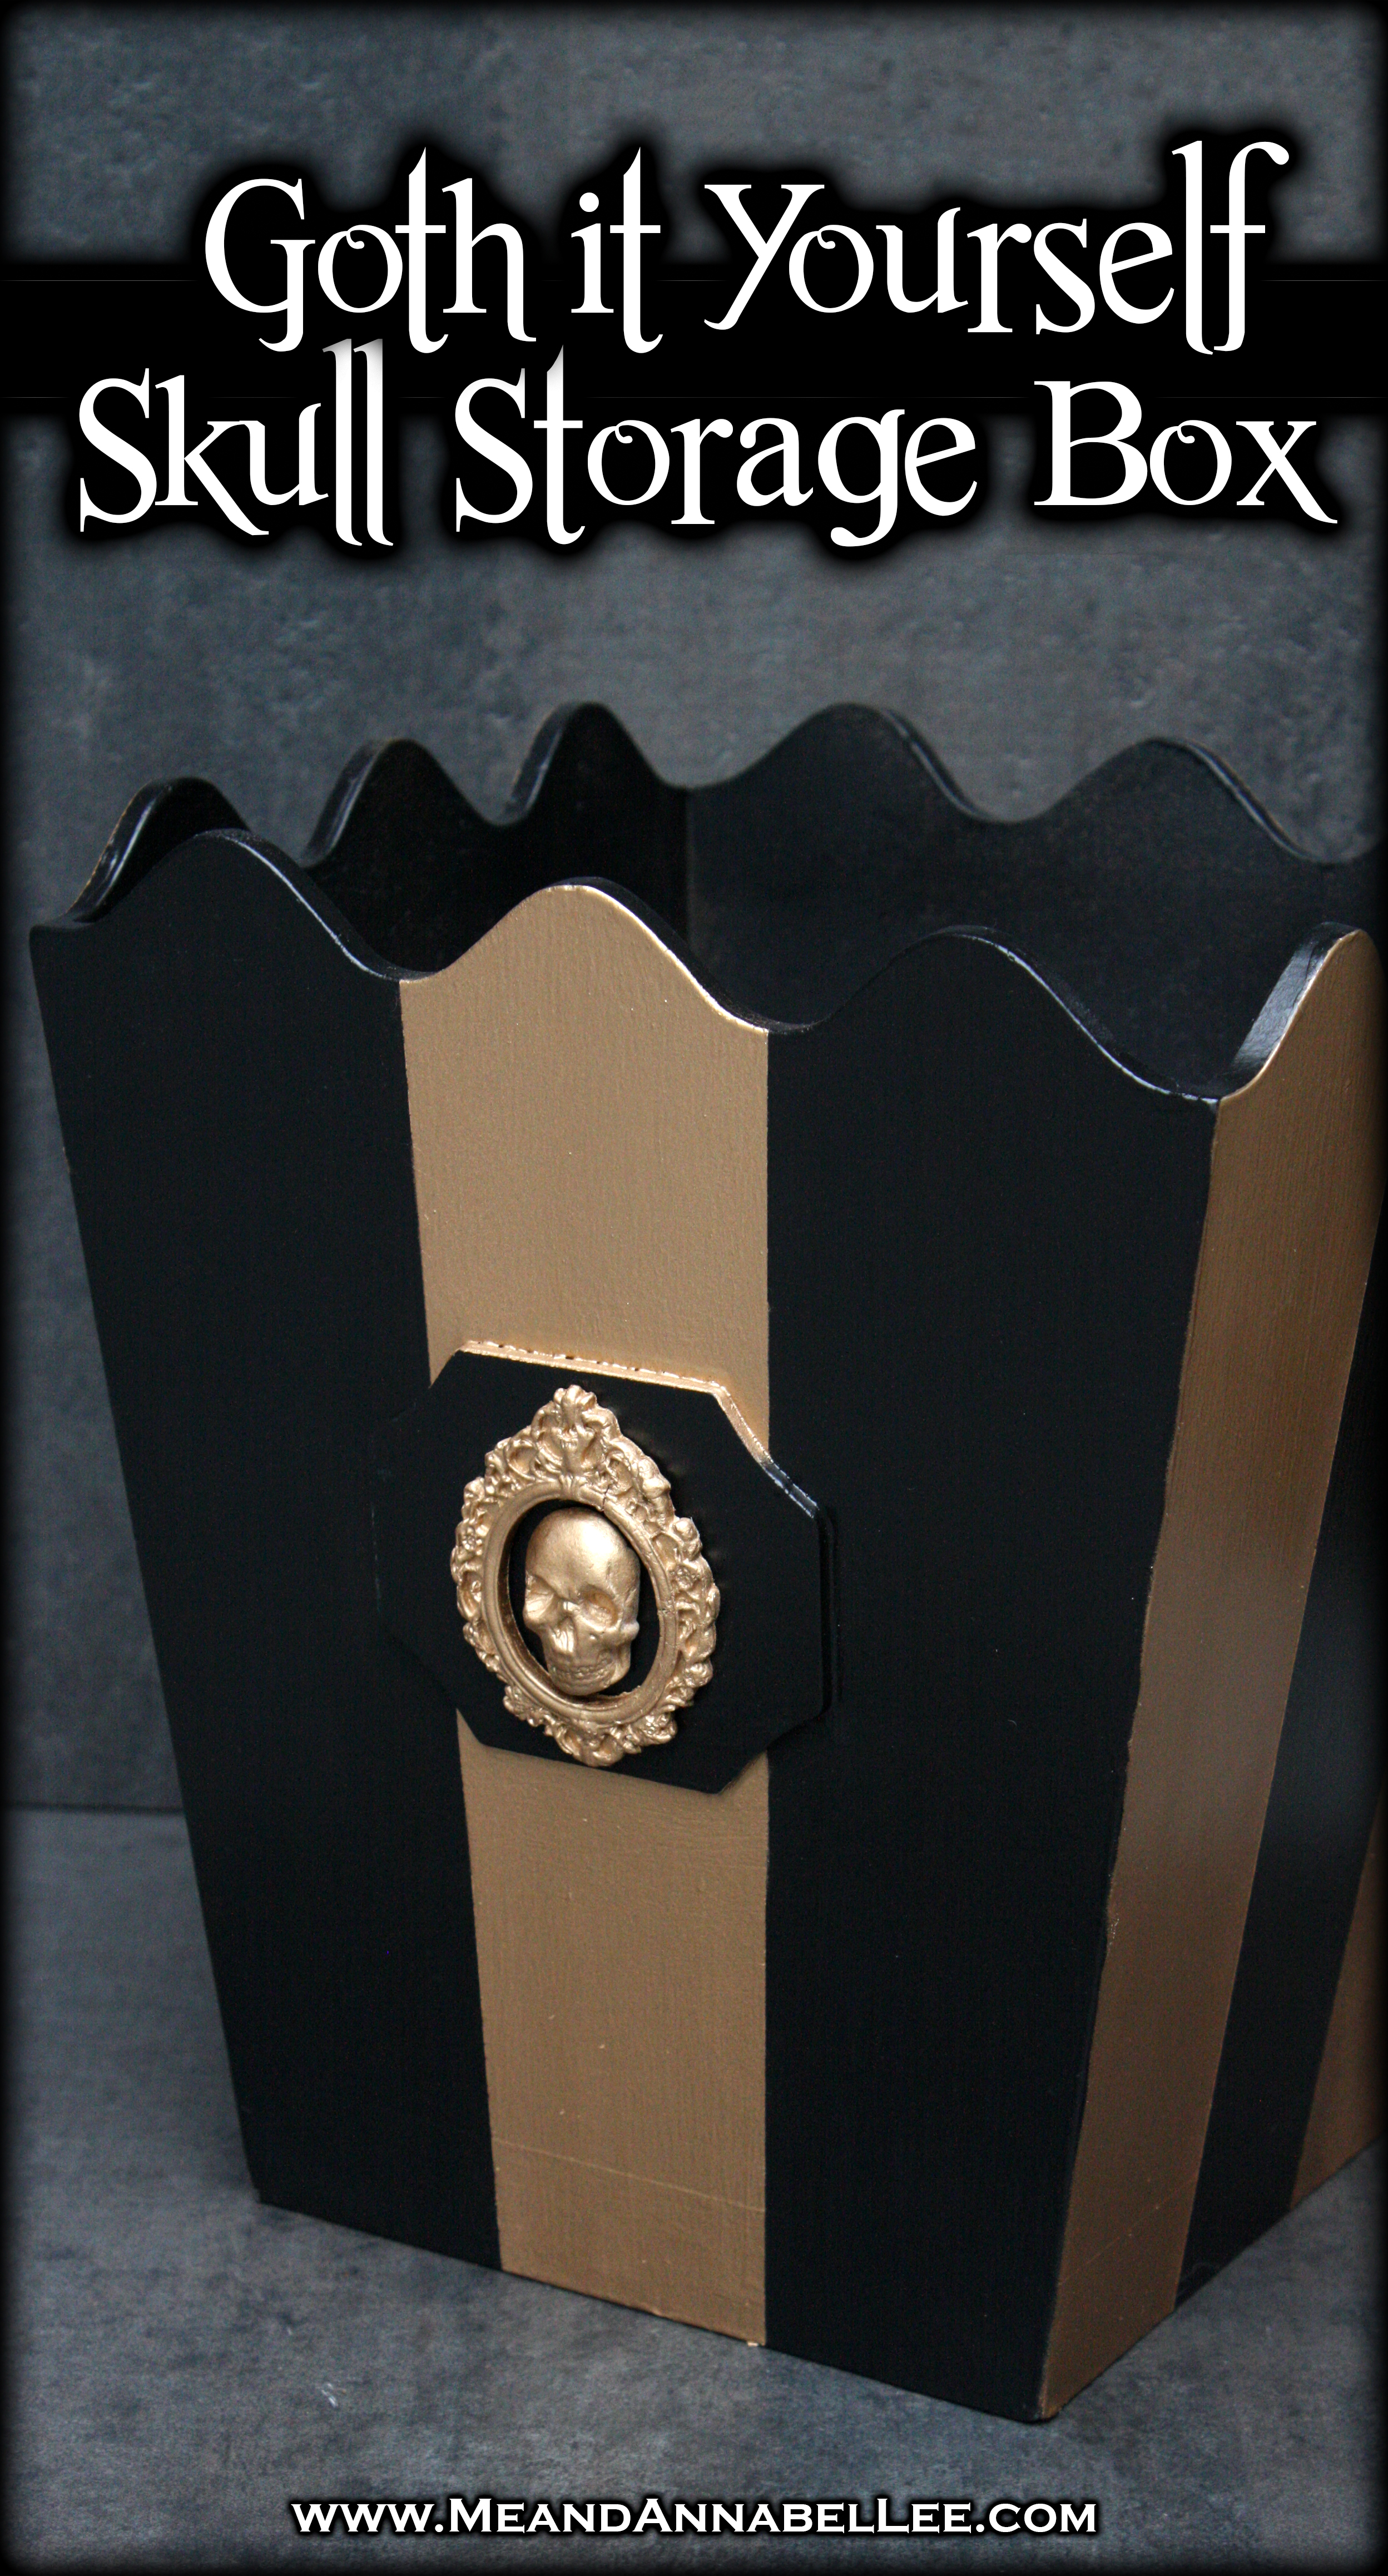 Goth-it-Yourself Project - transform an ordinary wooden box into a Victorian Gothic Skull Storage Box with bold yet whimsical black & gold stripes and a Baroque Frame & Skull | Perfect for that Gothic Home Office or Craft Space | Me and Annabel Lee Blog